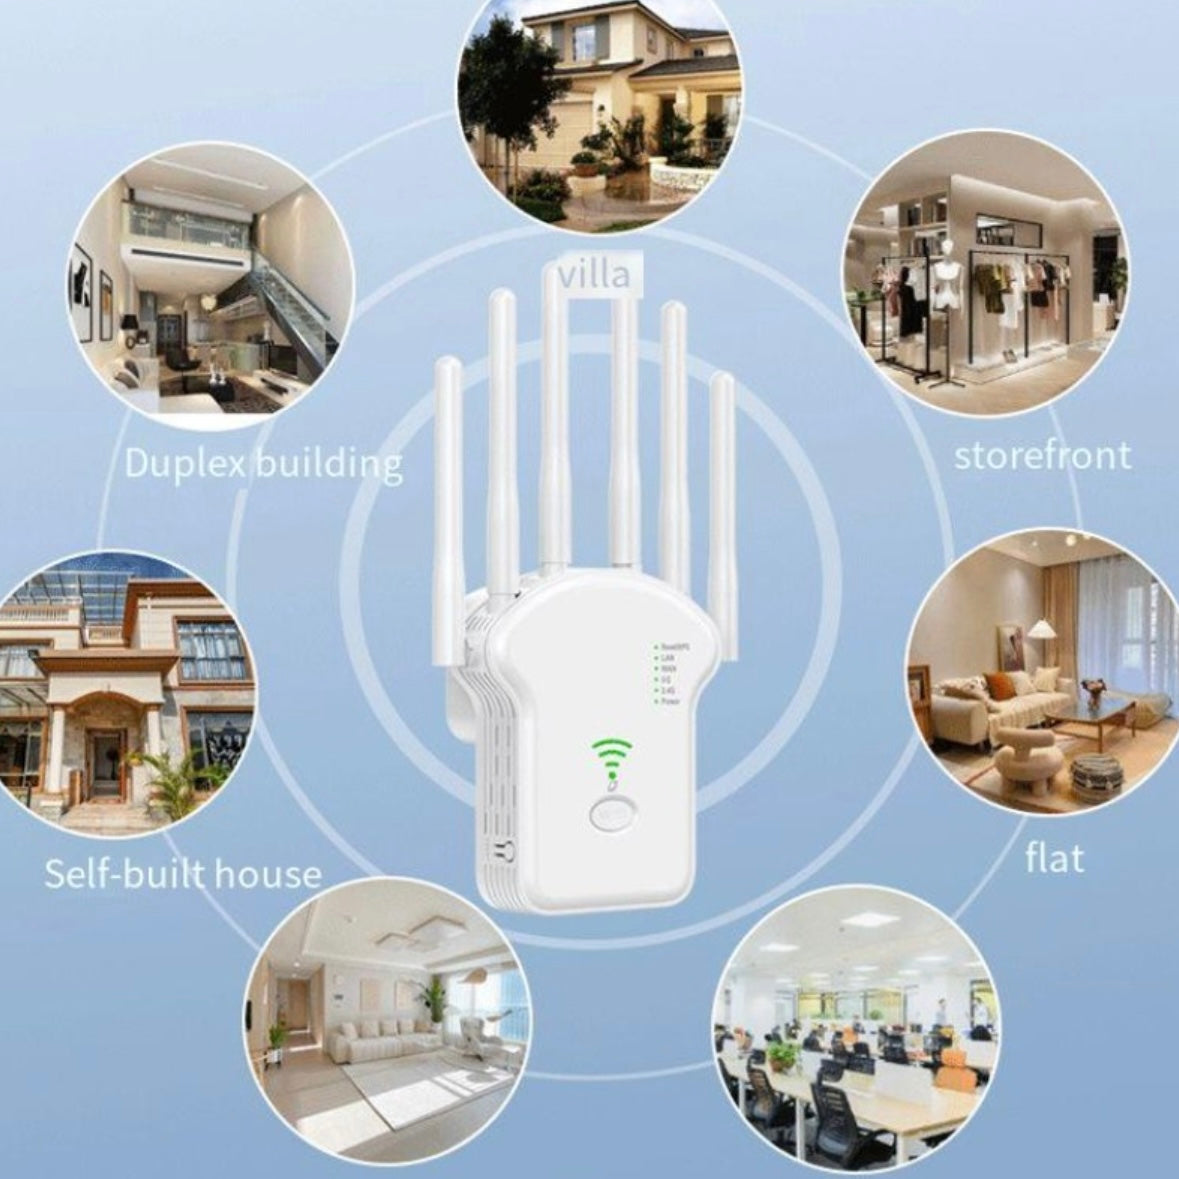 300Mbps 6 antenna 3-in-1 WiFi Repeater Router Enhance Wireless Signals Dual-Band Extender
U13 EU Plug